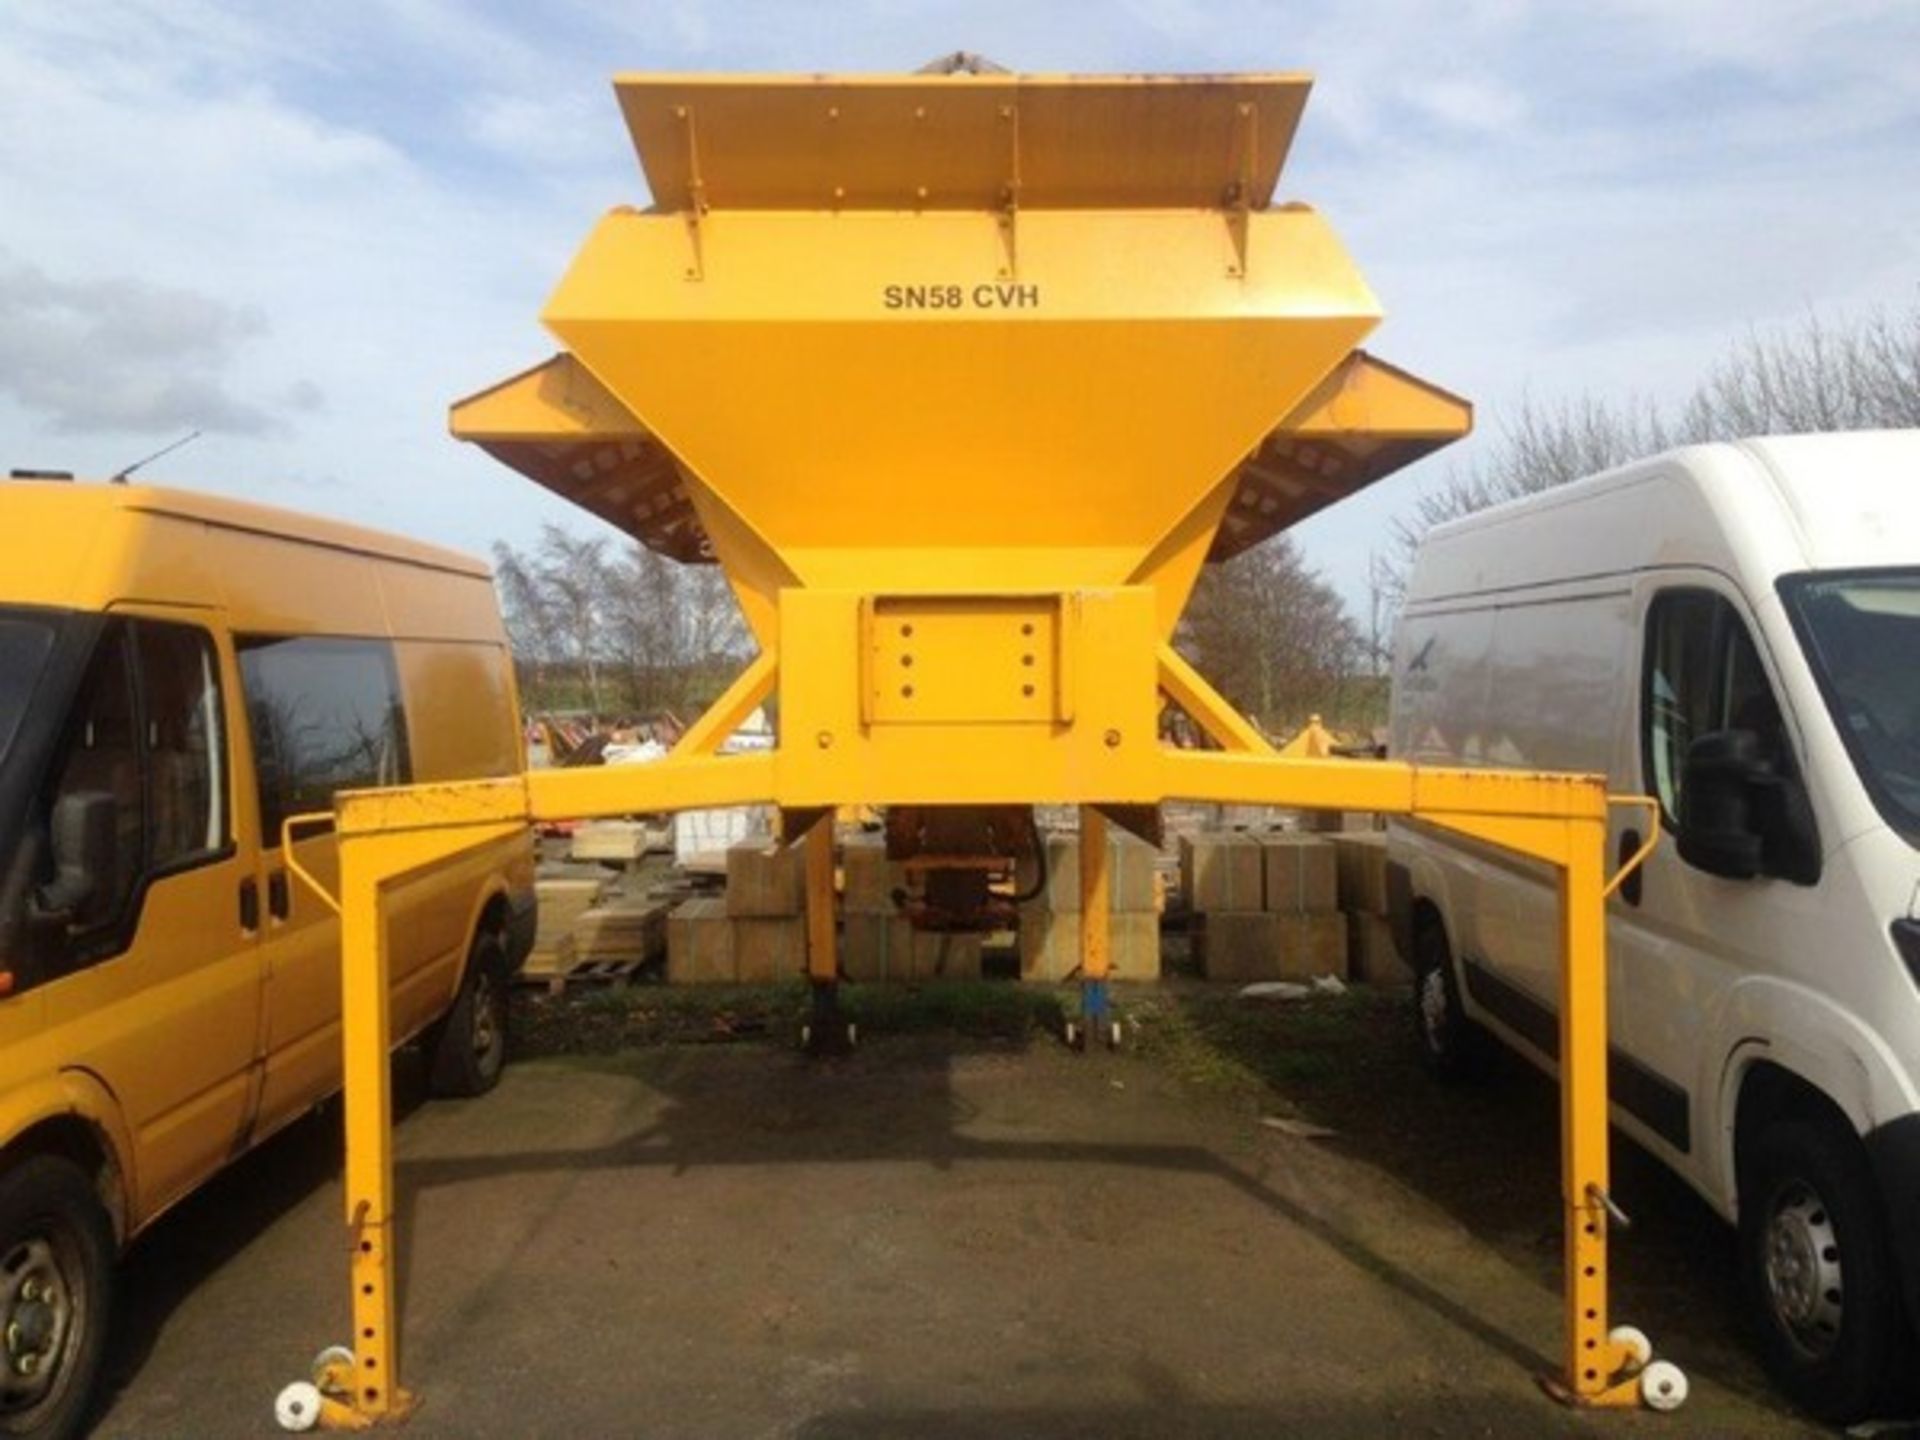 2004 ECON WZCQHJ46 body gritter s/n 37770 Reg No SN58 CVH (861) **To be sold from Errol auction s